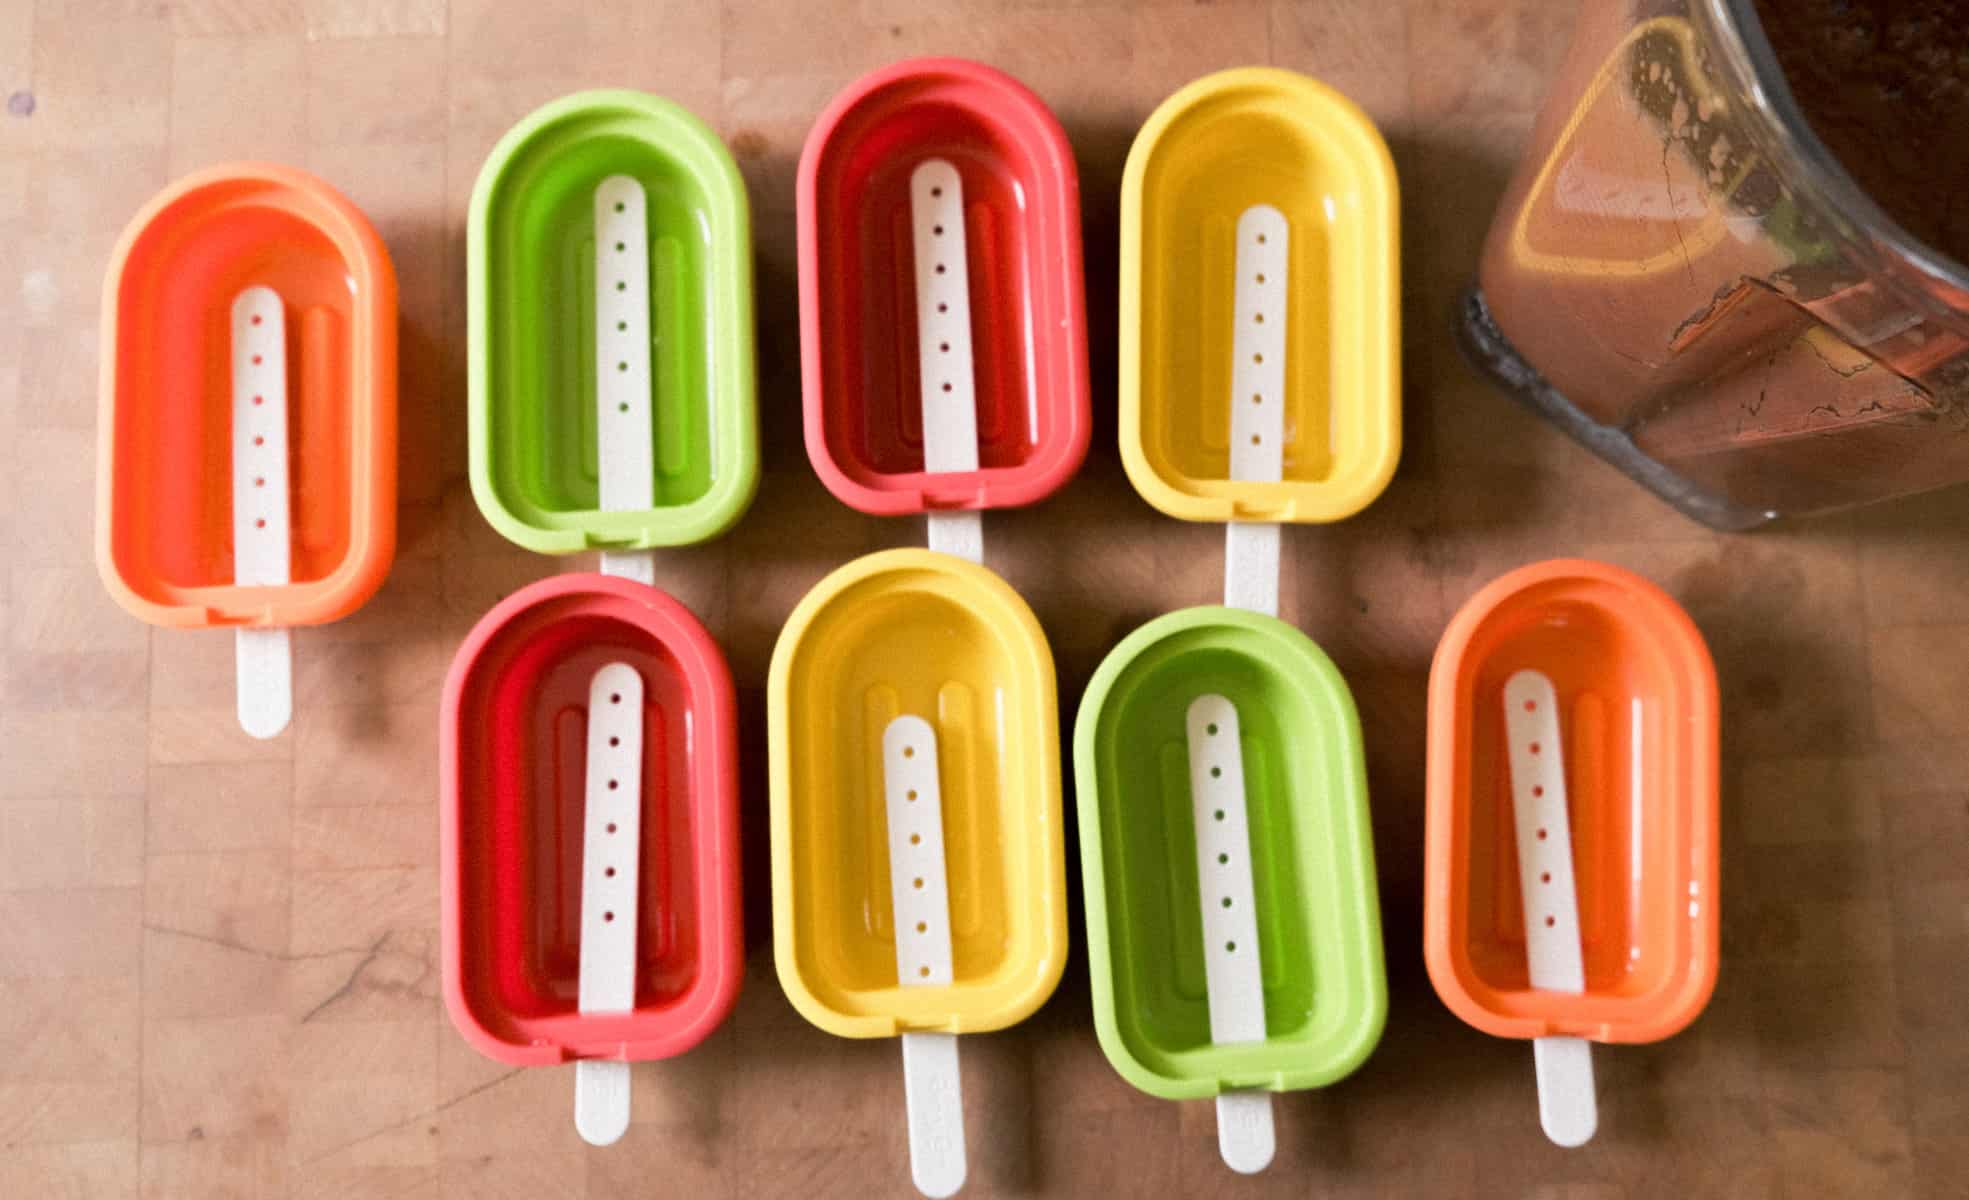 popsicle molds for chocolate fudgsicles